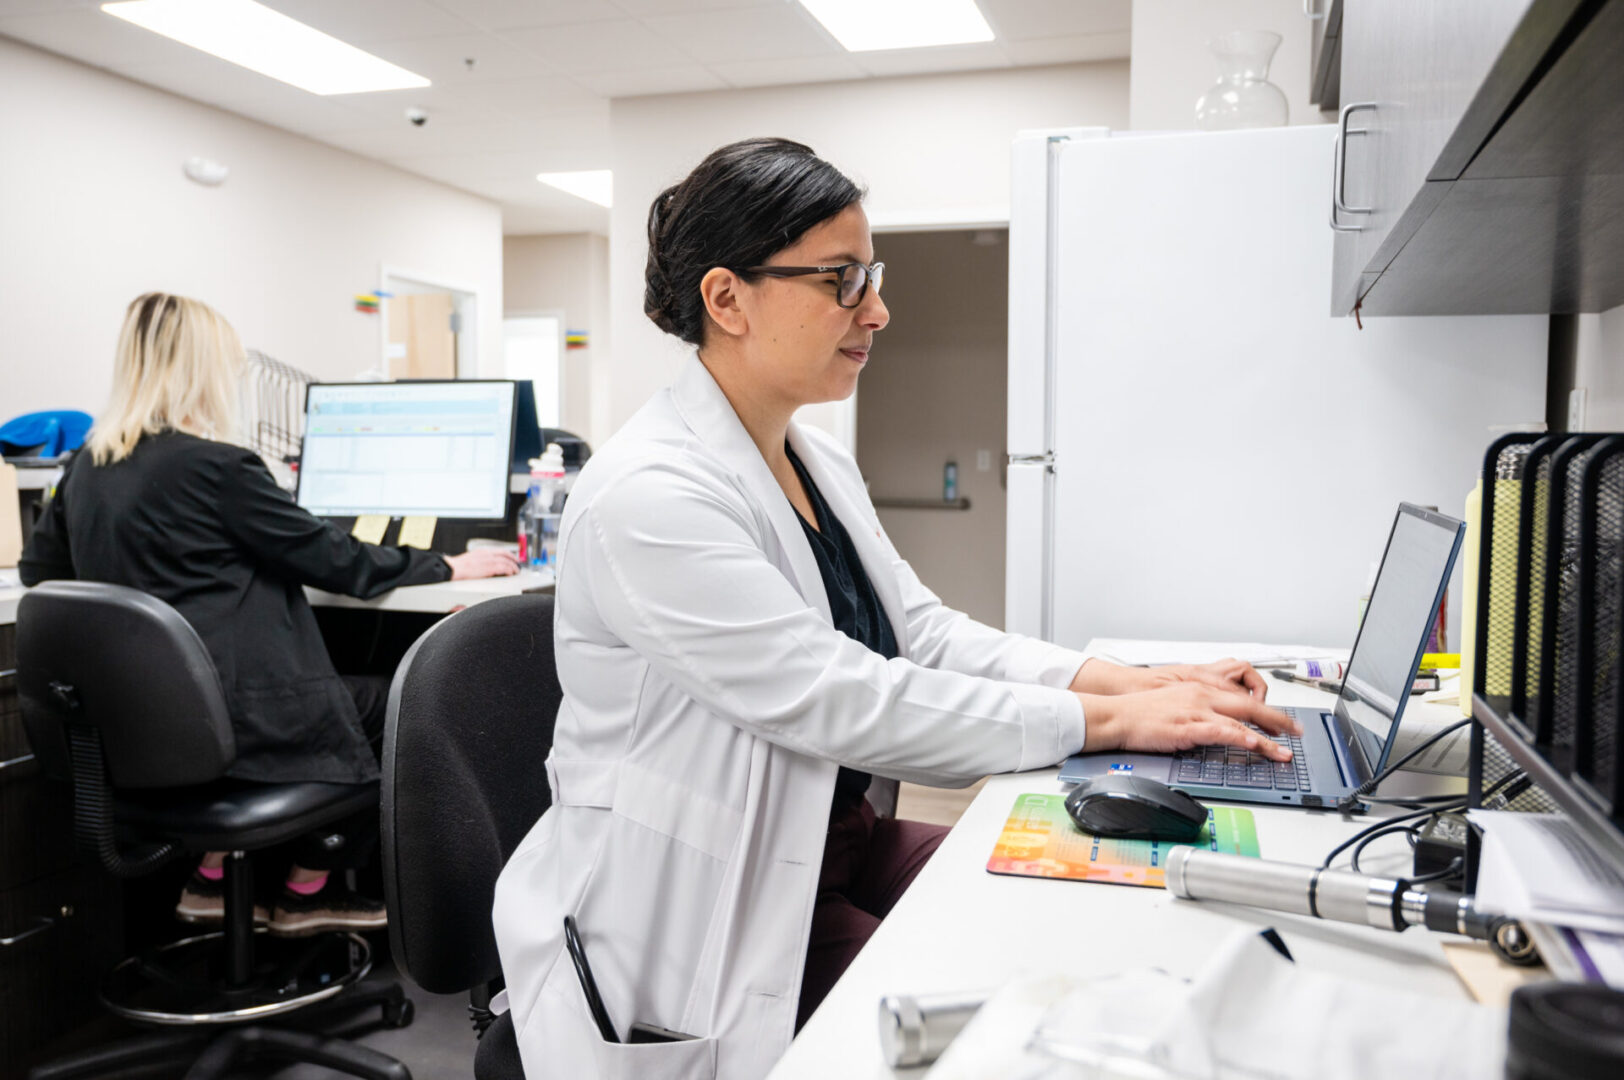 A woman in glasses and white lab coat using a computer.